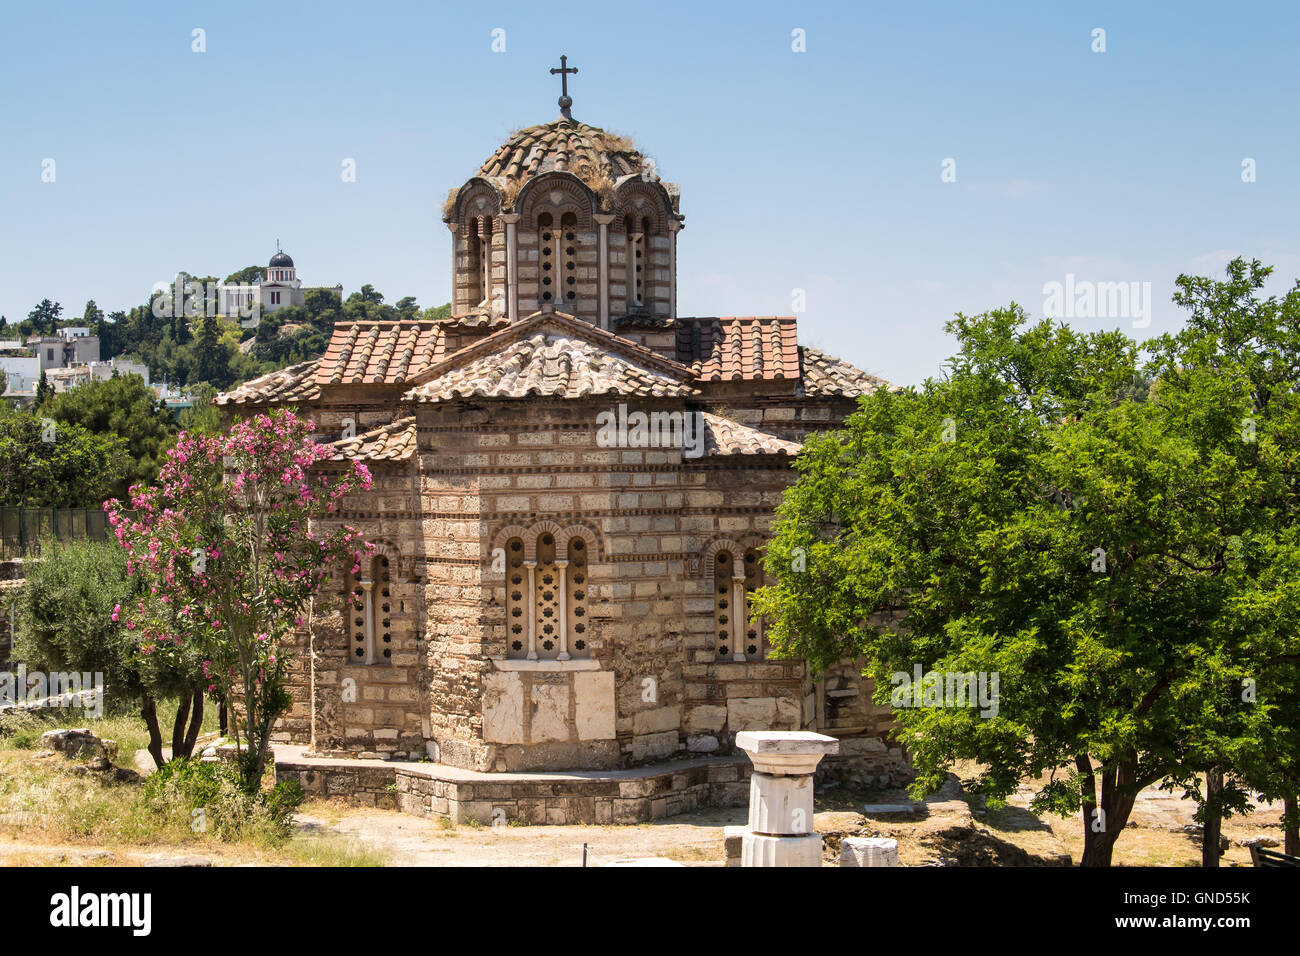 Old orthodox basilica in the city center of Athens. Park with olive and oleander trees. Hill in the background. Blue sky. Stock Photo